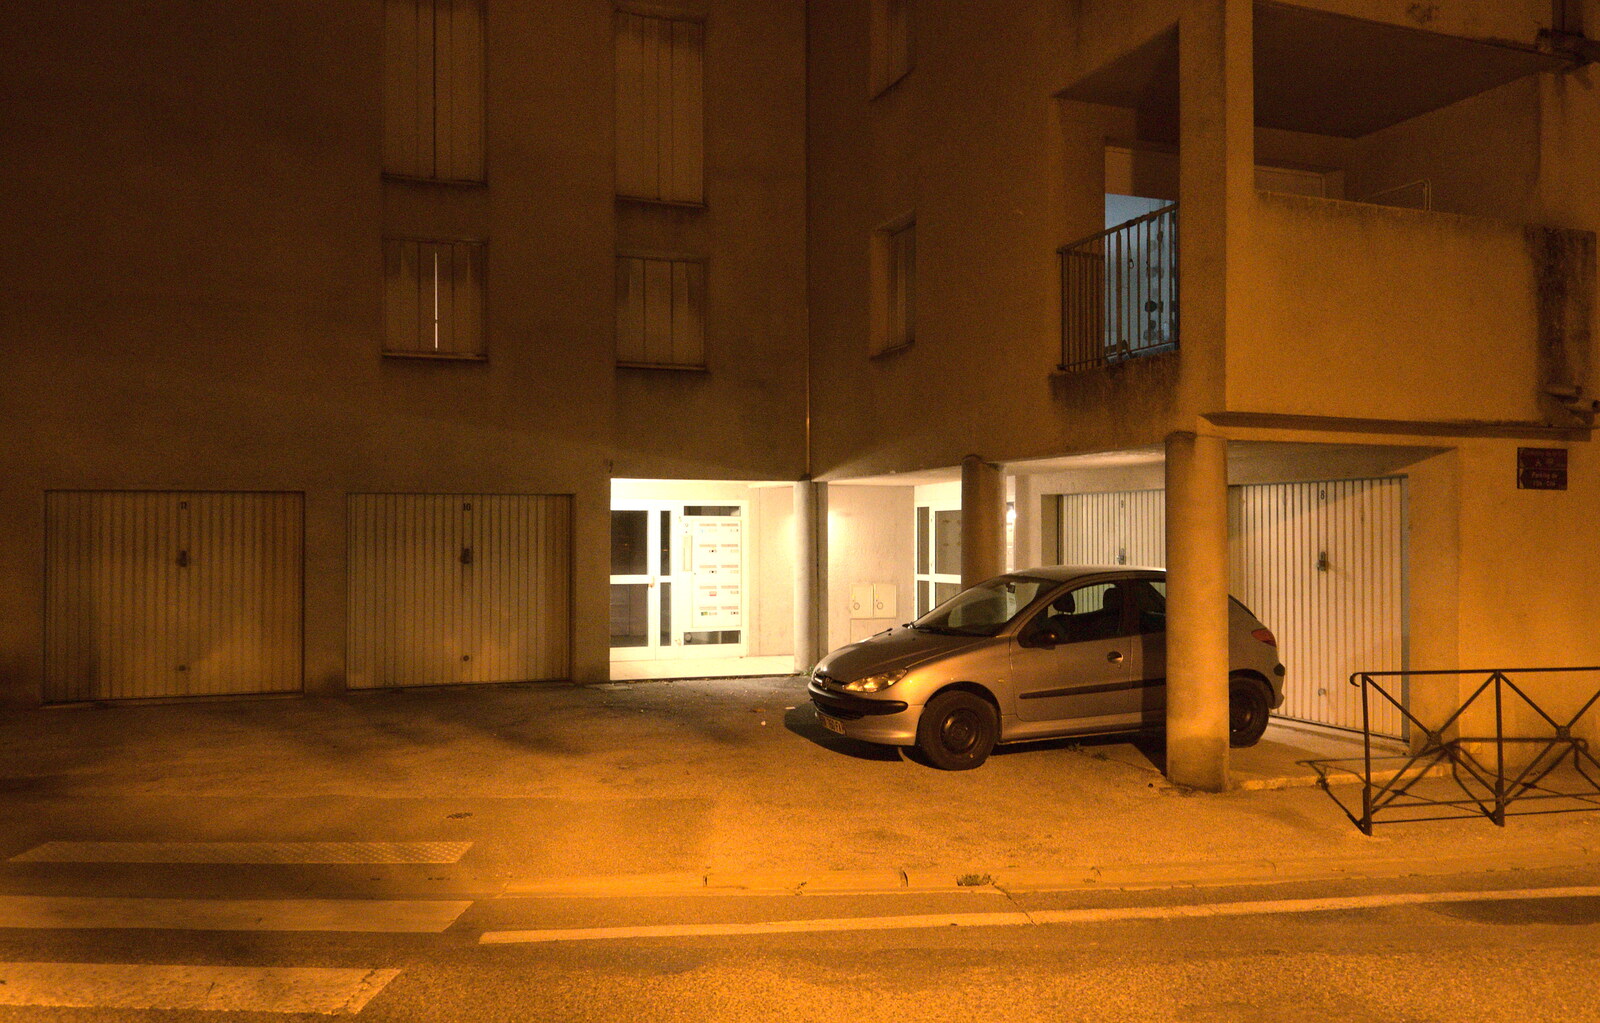 A solitary car waits at the bottom of an apartment block from Abbaye Sainte-Marie de Lagrasse and The Lac de la Cavayère, Aude, France - 10th August